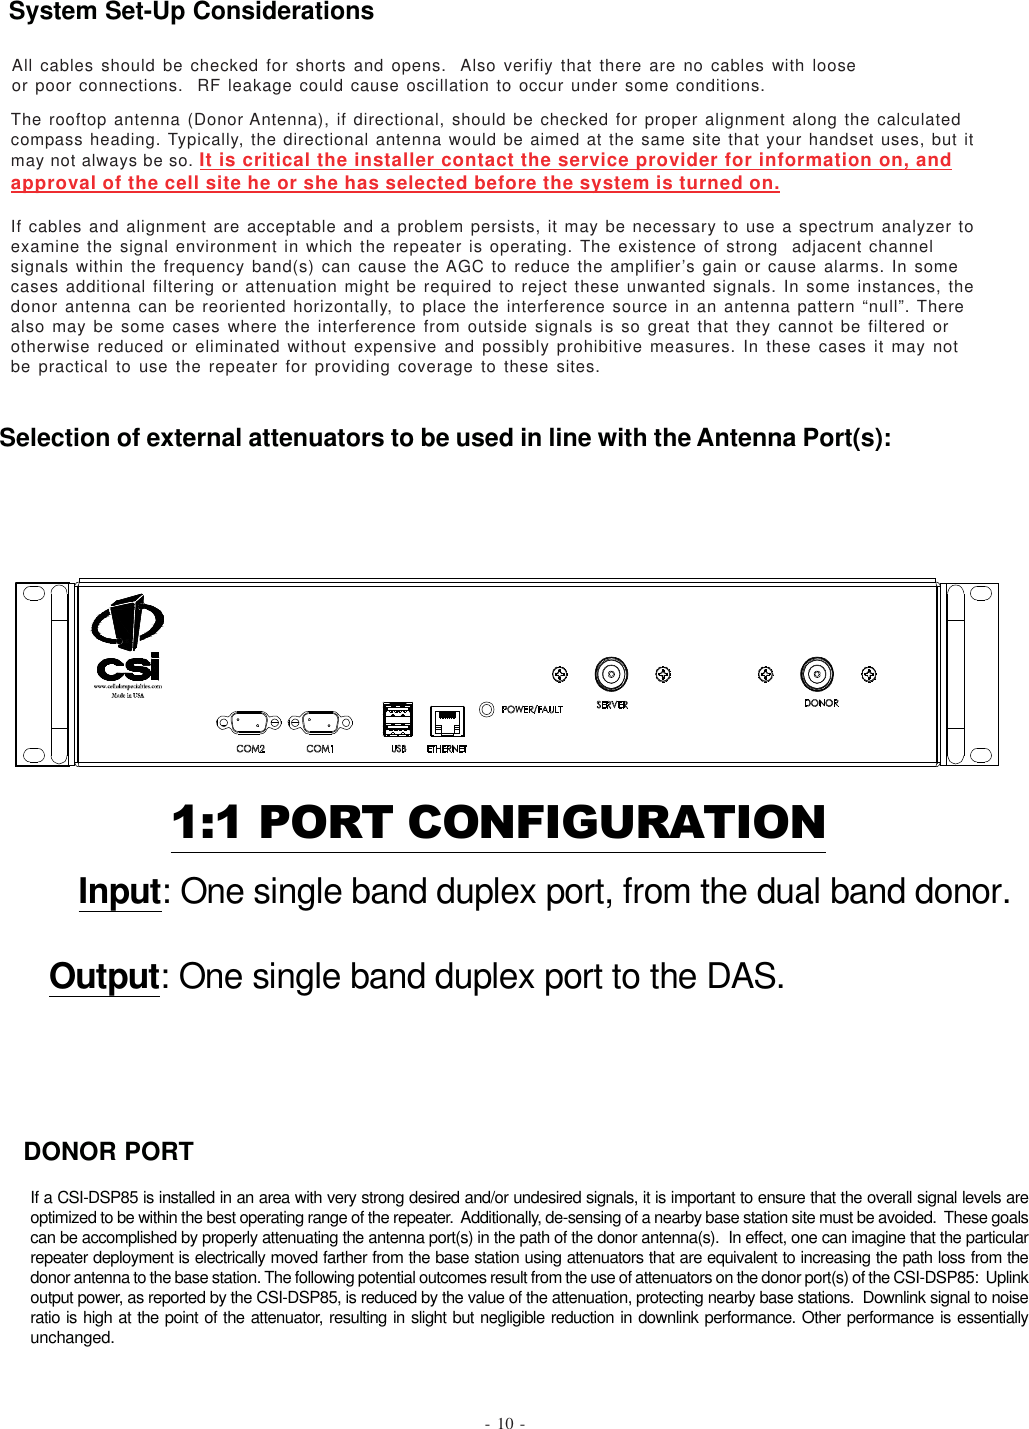 1:1 PORT CONFIGURATION   Input: One single band duplex port, from the dual band donor.Output: One single band duplex port to the DAS.The rooftop antenna (Donor Antenna), if directional, should be checked for proper alignment along the calculatedcompass heading. Typically, the directional antenna would be aimed at the same site that your handset uses, but itmay not always be so. It is critical the installer contact the service provider for information on, andapproval of the cell site he or she has selected before the system is turned on.If cables and alignment are acceptable and a problem persists, it may be necessary to use a spectrum analyzer toexamine the signal environment in which the repeater is operating. The existence of strong  adjacent channelsignals within the frequency band(s) can cause the AGC to reduce the amplifier’s gain or cause alarms. In somecases additional filtering or attenuation might be required to reject these unwanted signals. In some instances, thedonor antenna can be reoriented horizontally, to place the interference source in an antenna pattern “null”. Therealso may be some cases where the interference from outside signals is so great that they cannot be filtered orotherwise reduced or eliminated without expensive and possibly prohibitive measures. In these cases it may notbe practical to use the repeater for providing coverage to these sites.- 10 -If a CSI-DSP85 is installed in an area with very strong desired and/or undesired signals, it is important to ensure that the overall signal levels areoptimized to be within the best operating range of the repeater.  Additionally, de-sensing of a nearby base station site must be avoided.  These goalscan be accomplished by properly attenuating the antenna port(s) in the path of the donor antenna(s).  In effect, one can imagine that the particularrepeater deployment is electrically moved farther from the base station using attenuators that are equivalent to increasing the path loss from thedonor antenna to the base station. The following potential outcomes result from the use of attenuators on the donor port(s) of the CSI-DSP85:  Uplinkoutput power, as reported by the CSI-DSP85, is reduced by the value of the attenuation, protecting nearby base stations.  Downlink signal to noiseratio is high at the point of the attenuator, resulting in slight but negligible reduction in downlink performance. Other performance is essentiallyunchanged.DONOR PORTSystem Set-Up ConsiderationsSelection of external attenuators to be used in line with the Antenna Port(s):All cables should be checked for shorts and opens.  Also verifiy that there are no cables with looseor poor connections.  RF leakage could cause oscillation to occur under some conditions.